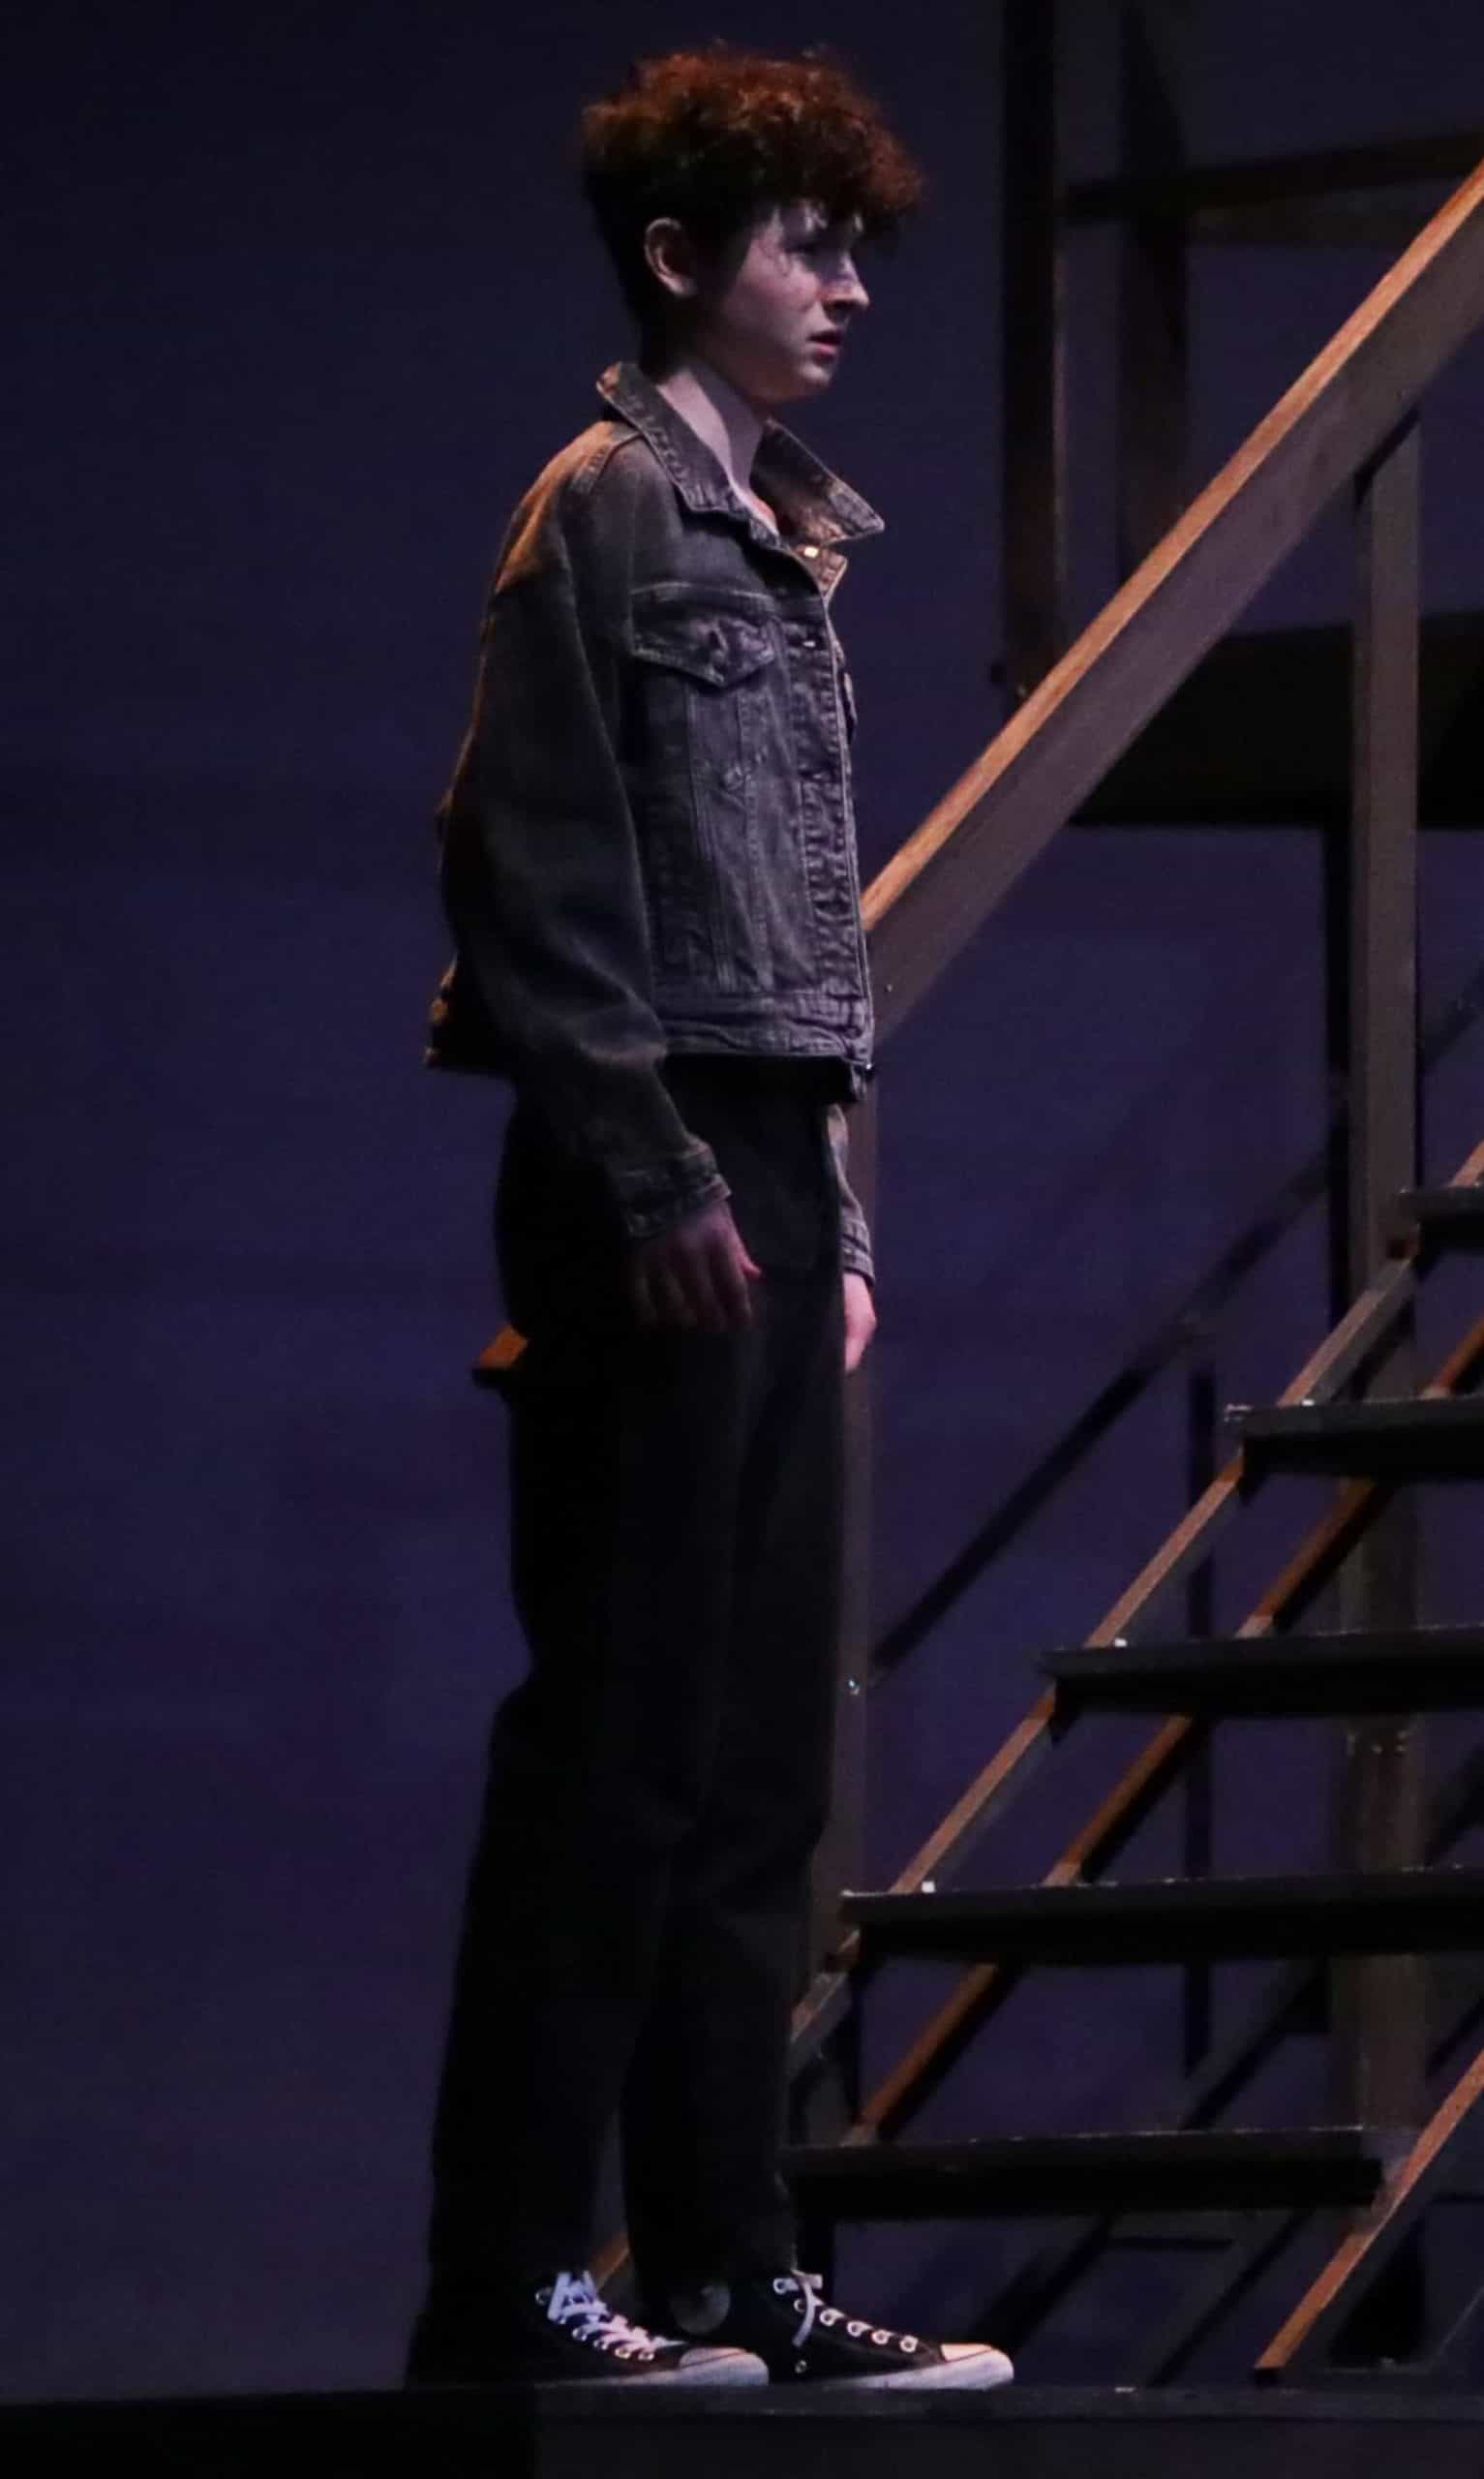 Alex Boyd as Ren McCormack tries to understand Ariel, the minister's daughter, in Footloose with the Berkshire Theatre Group. Press photo courtesy of BTG.